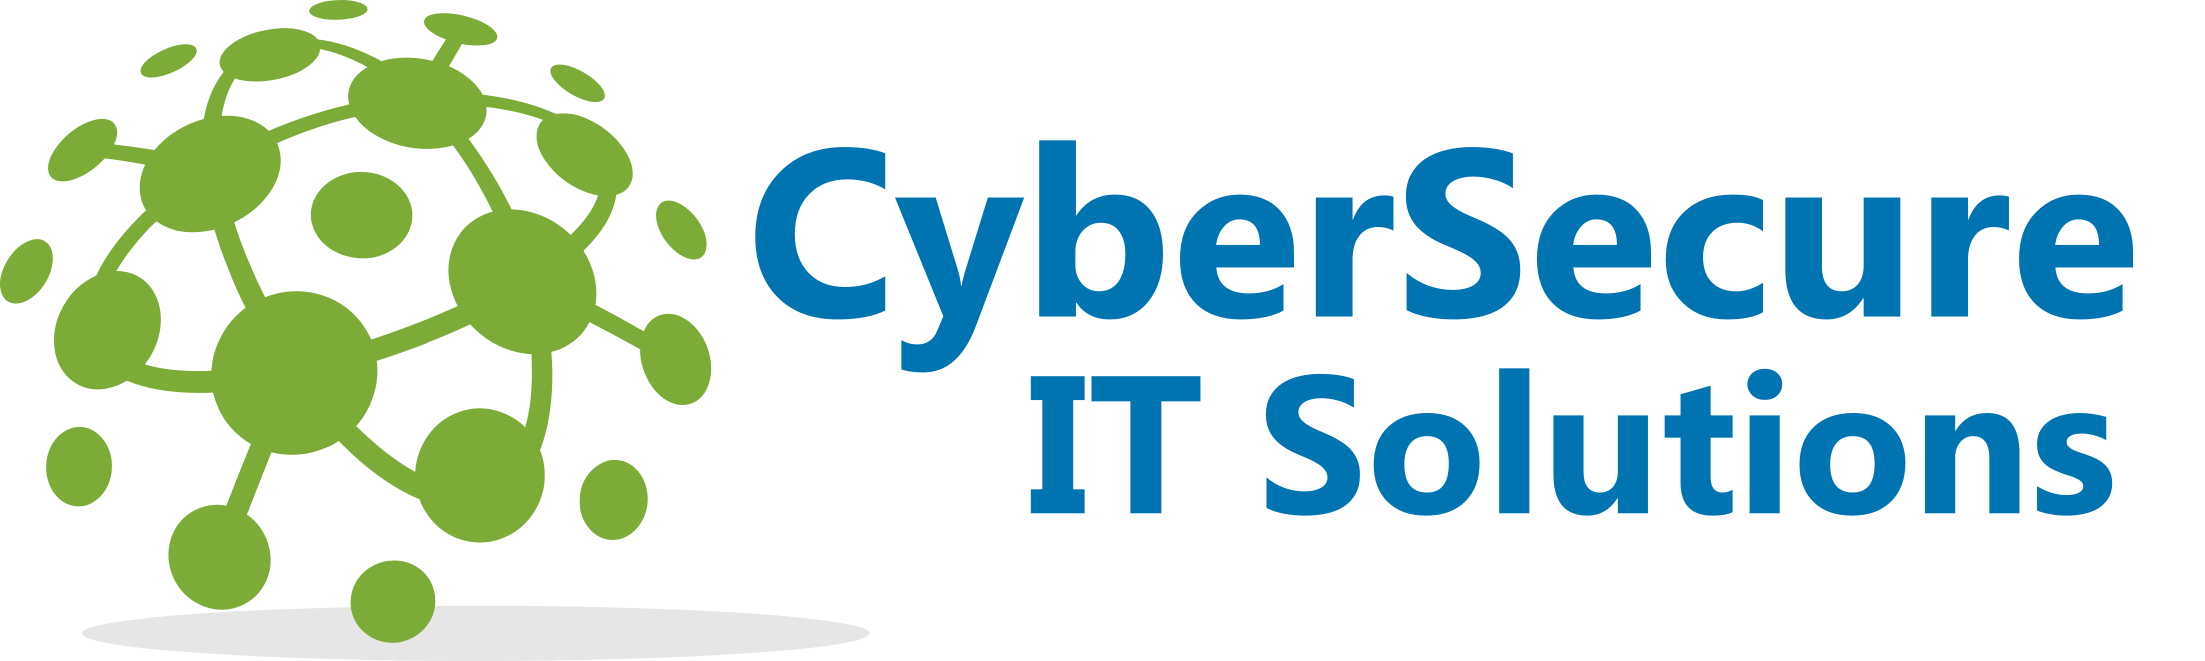 CyberSecure IT Solutions reviews | 780 5th Ave S - Naples FL